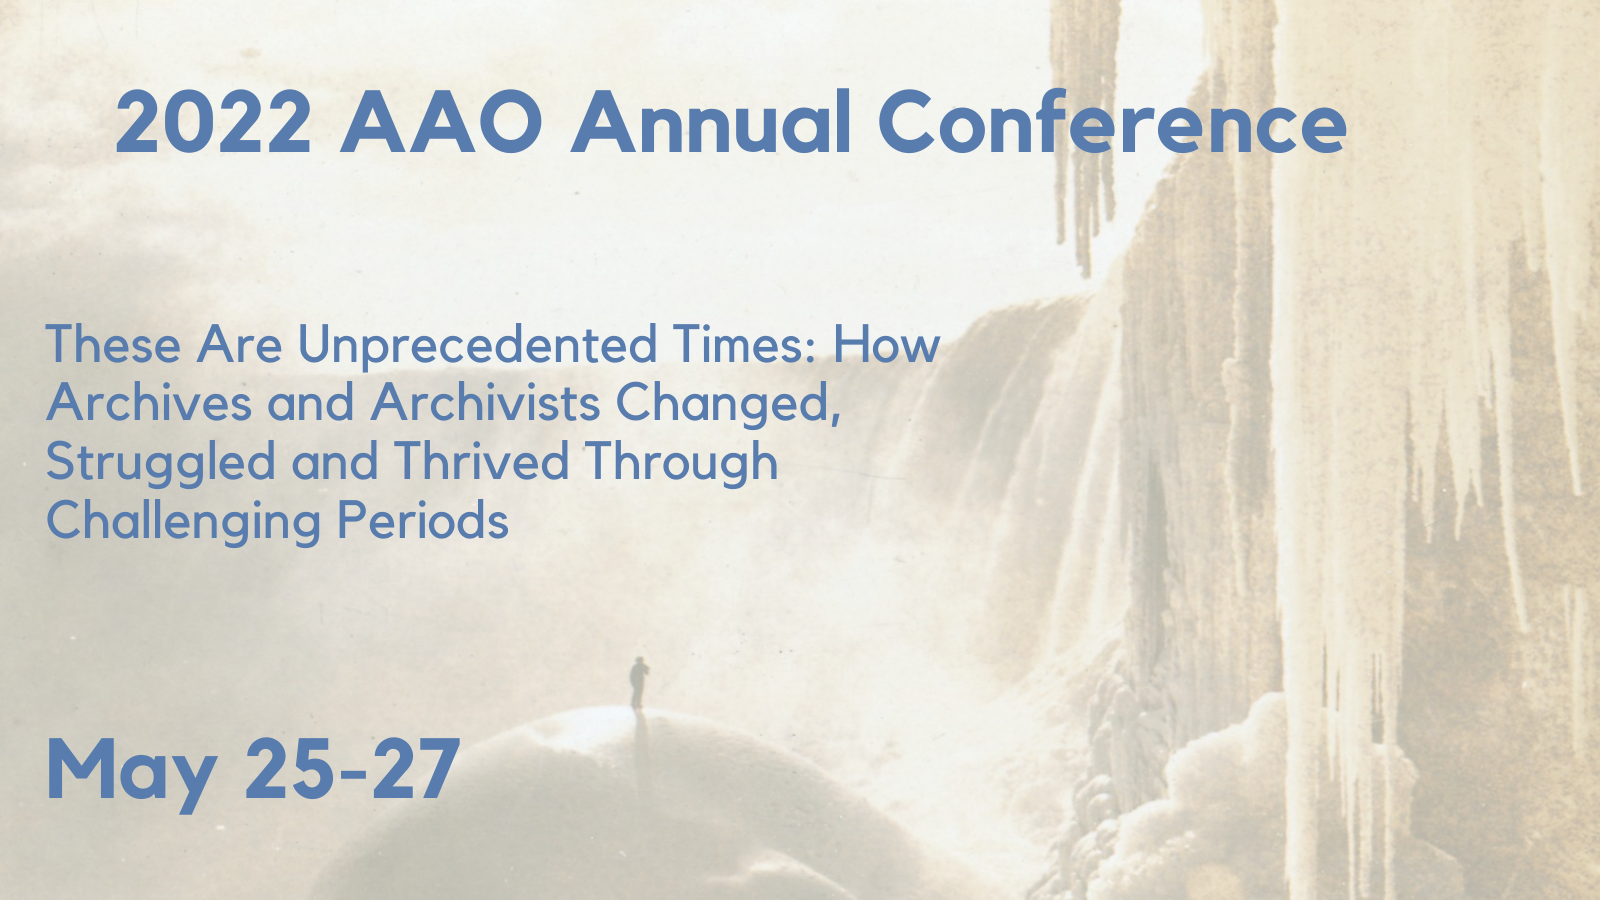 Graphic for the 2022 AAO Annual Conference. A man standing in front of the frozen Niagara Falls is in the background. The foreground has text that reads Theme: These Are Unprecedented Times: How Archives and Archivists Changed, Struggled and Thrived Through Challenging Periods . May 25-27.